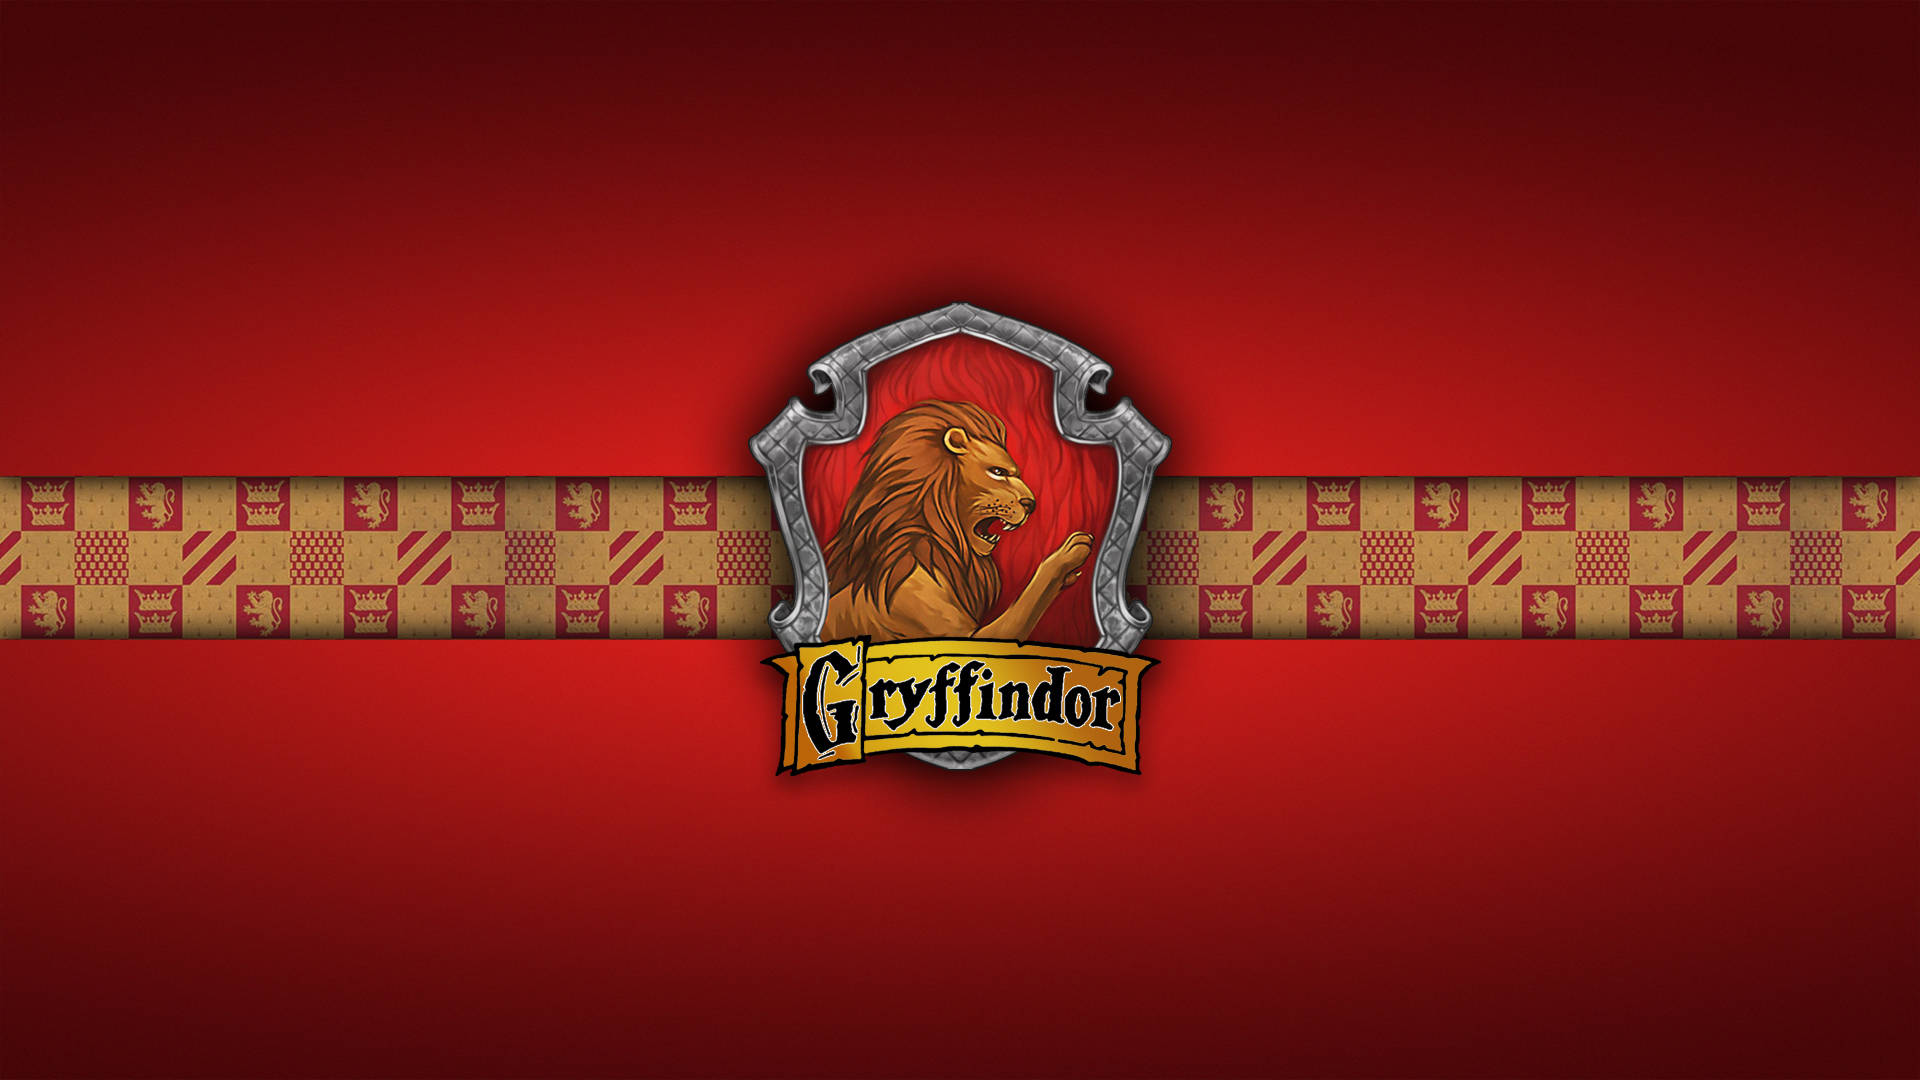 Gryffindor Wallpaper wallpaper by MhmtGlyn - Download on ZEDGE™ | 5542